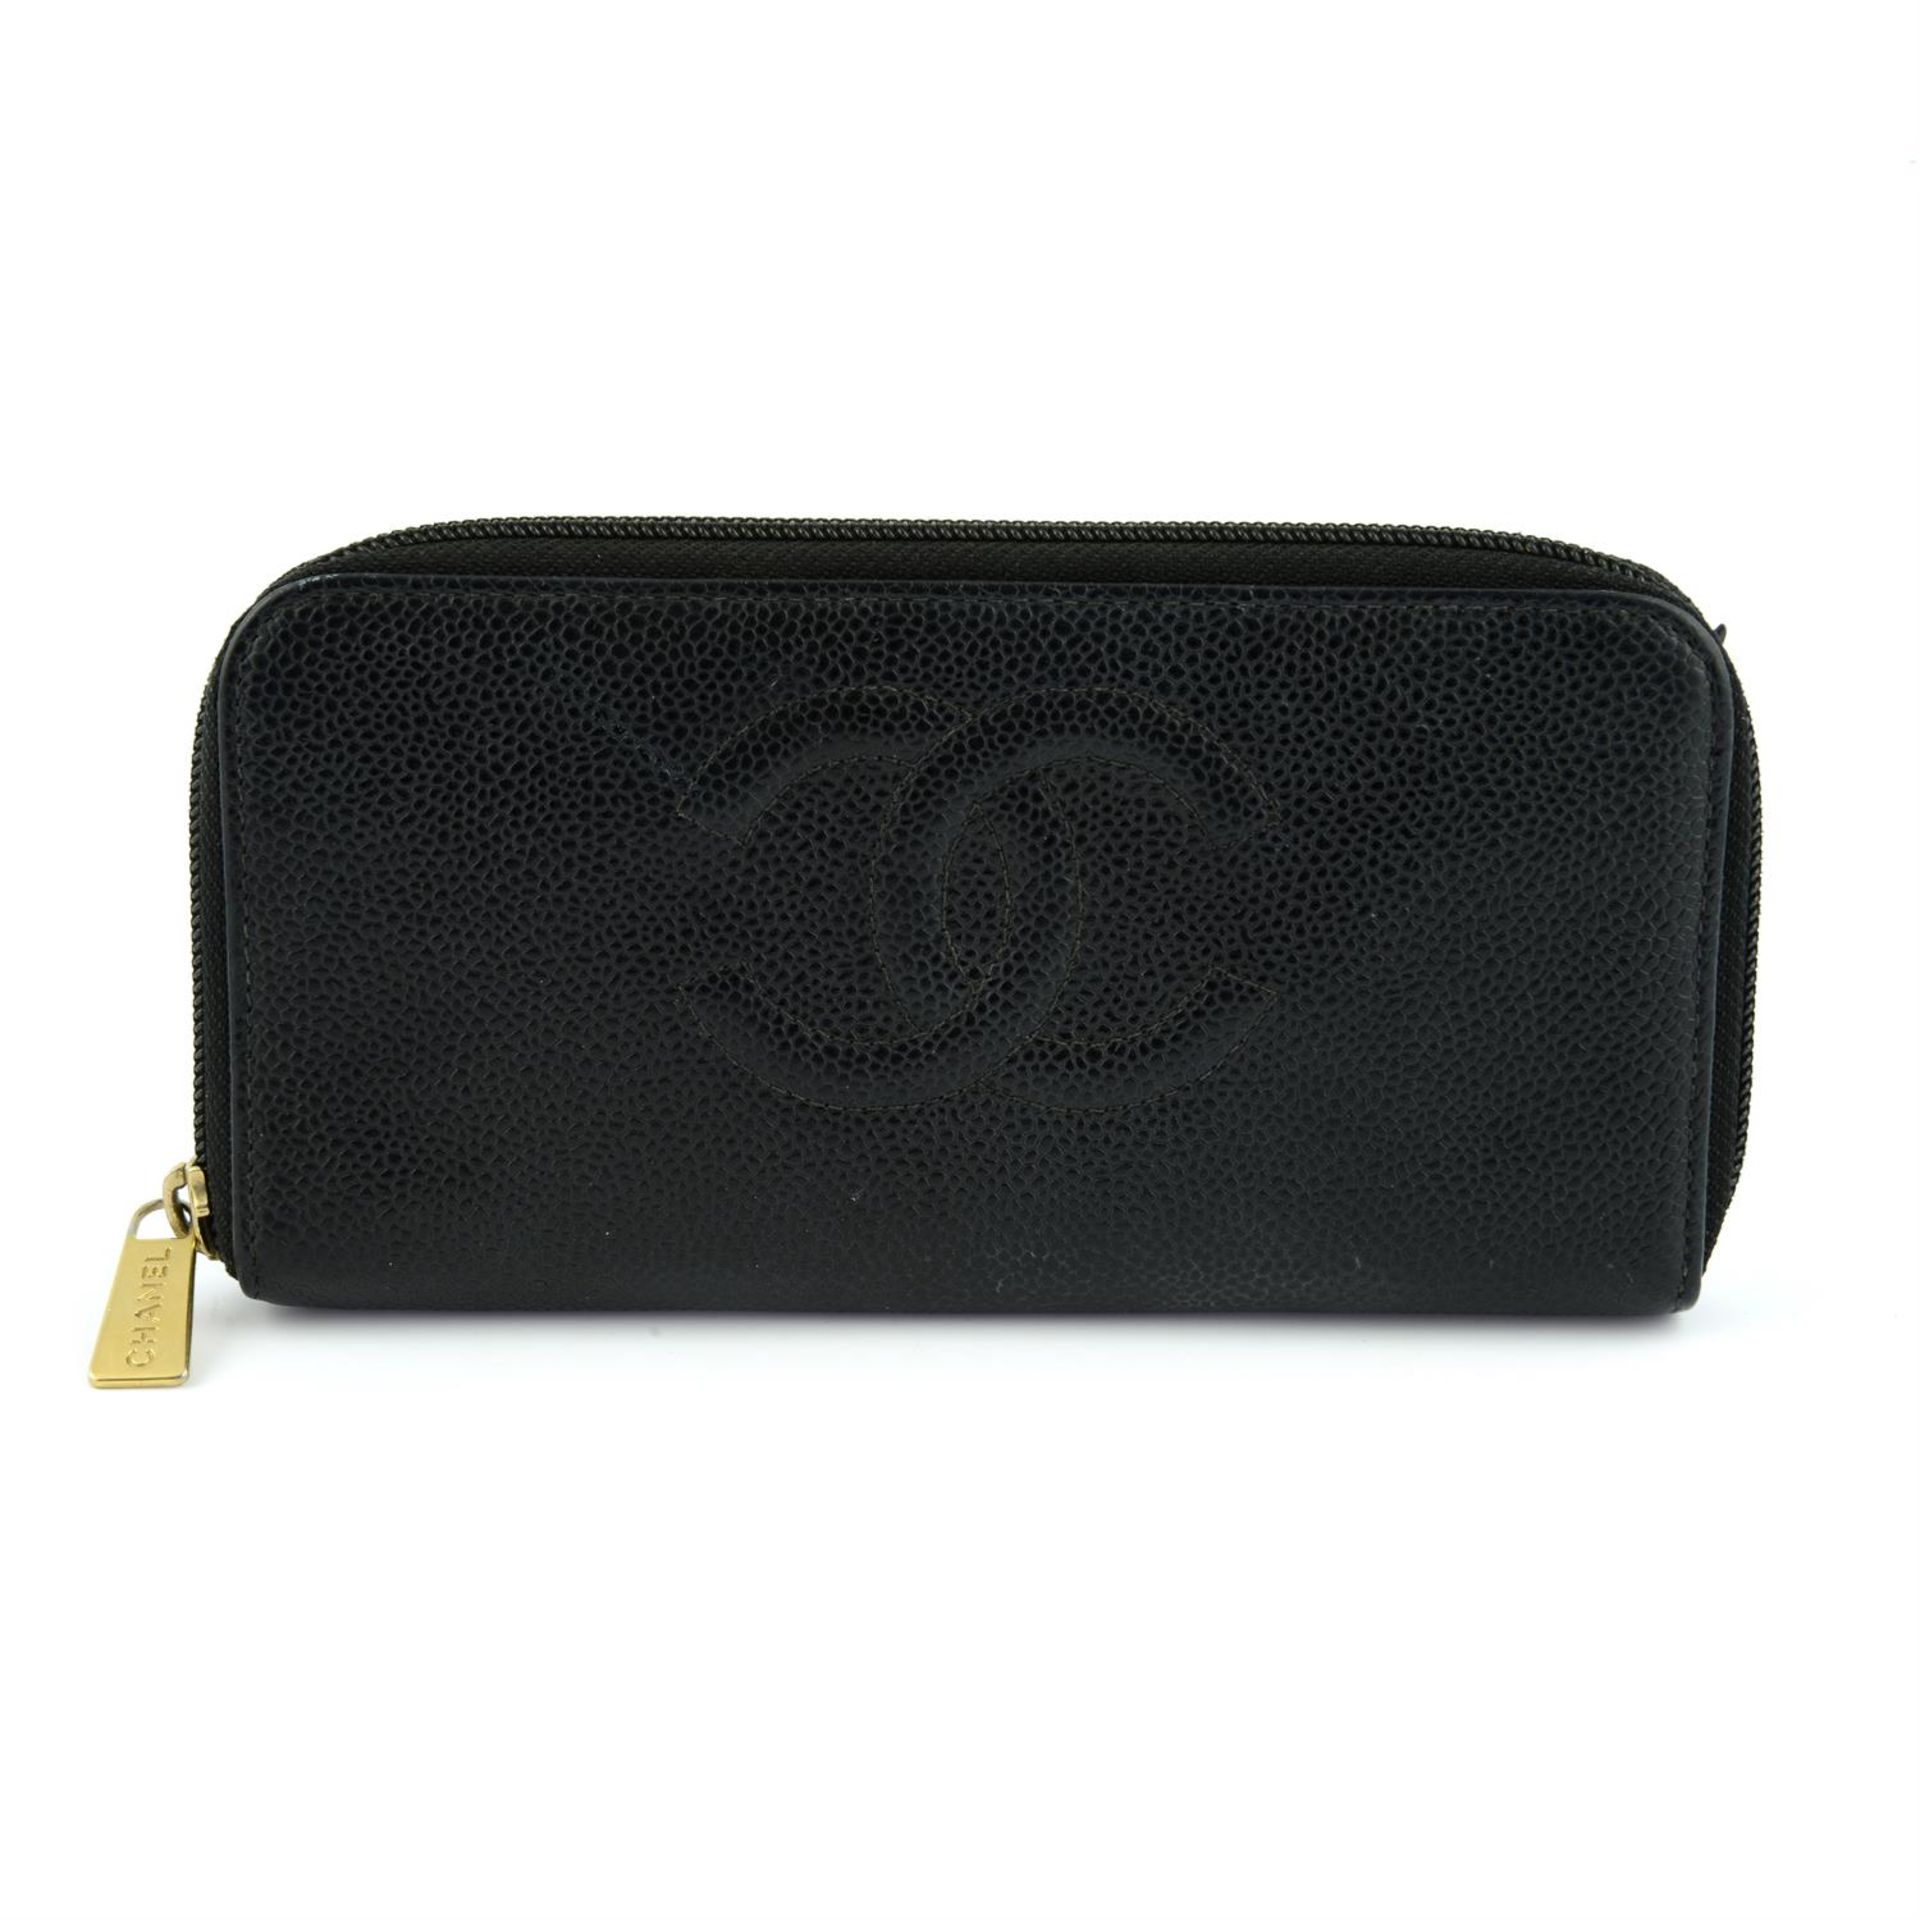 CHANEL - a 2004 Portefeuille wallet.